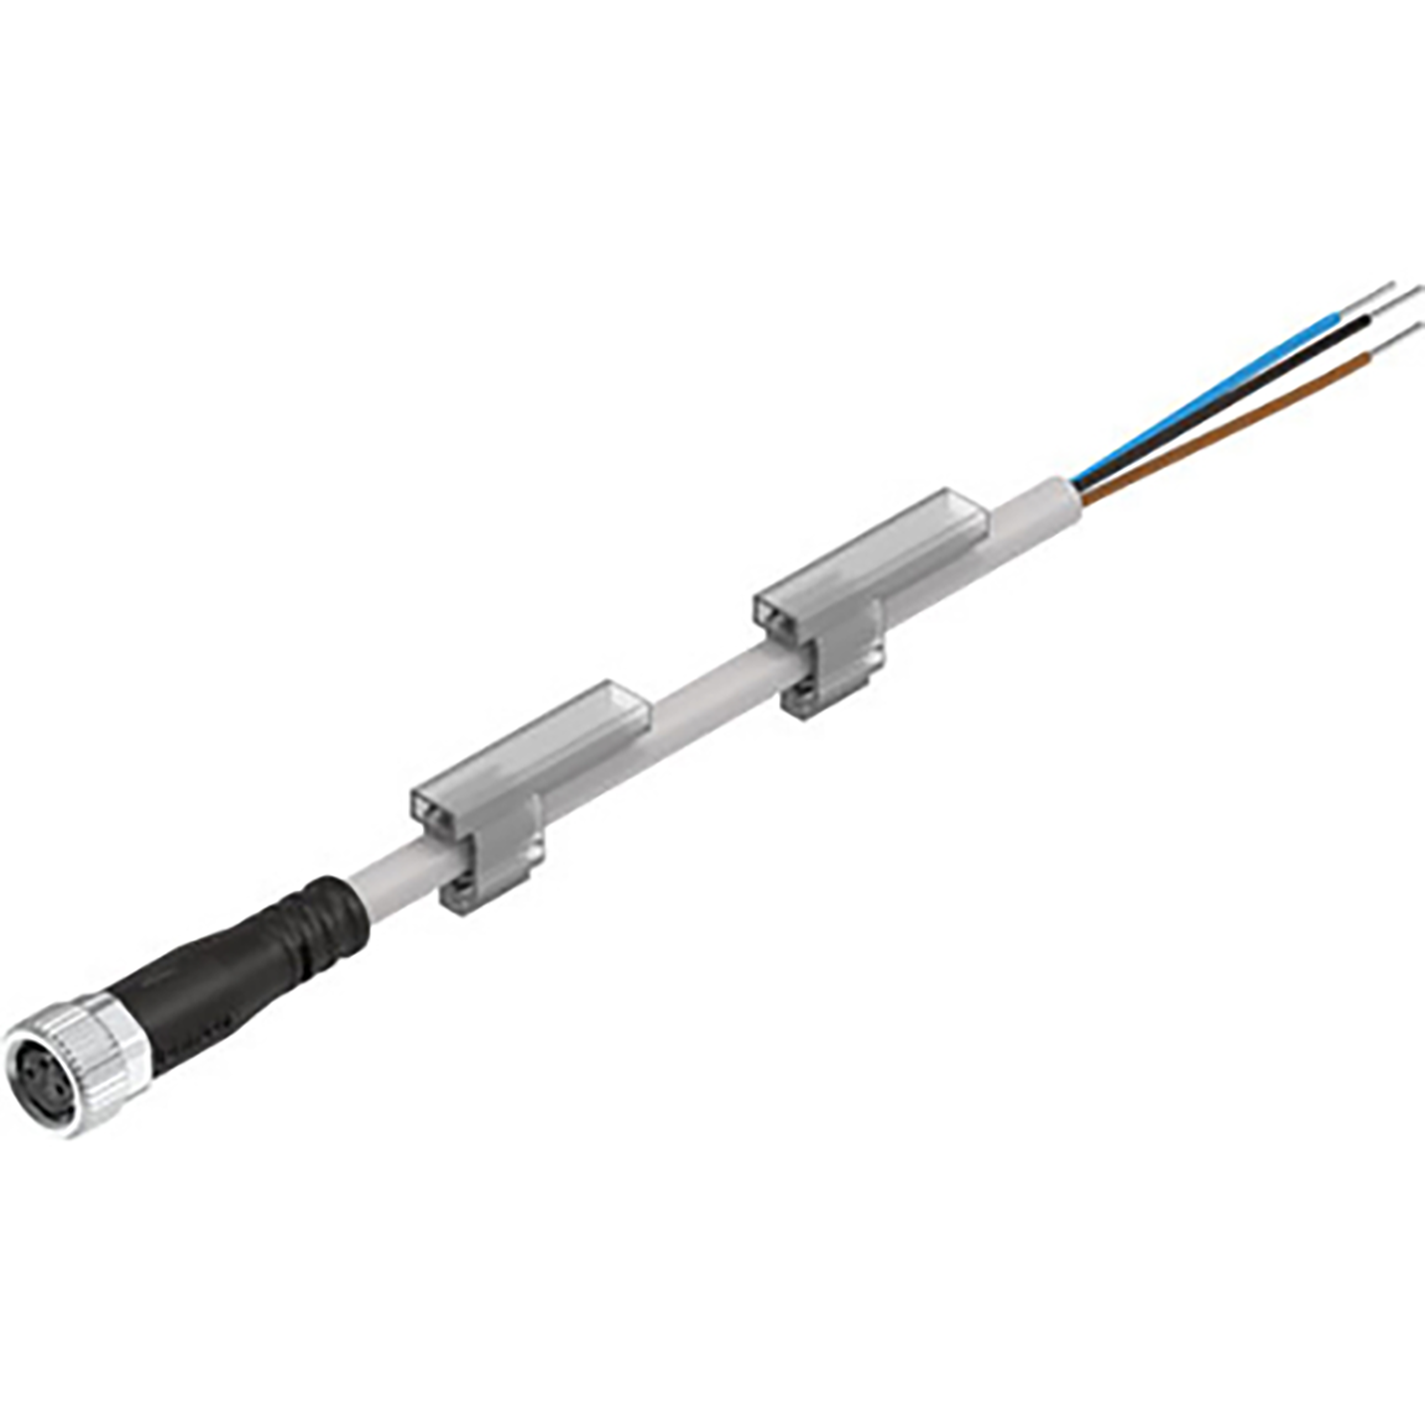 NEBU-M8W3-R-2.5-LE3 CONNECTING CABLE